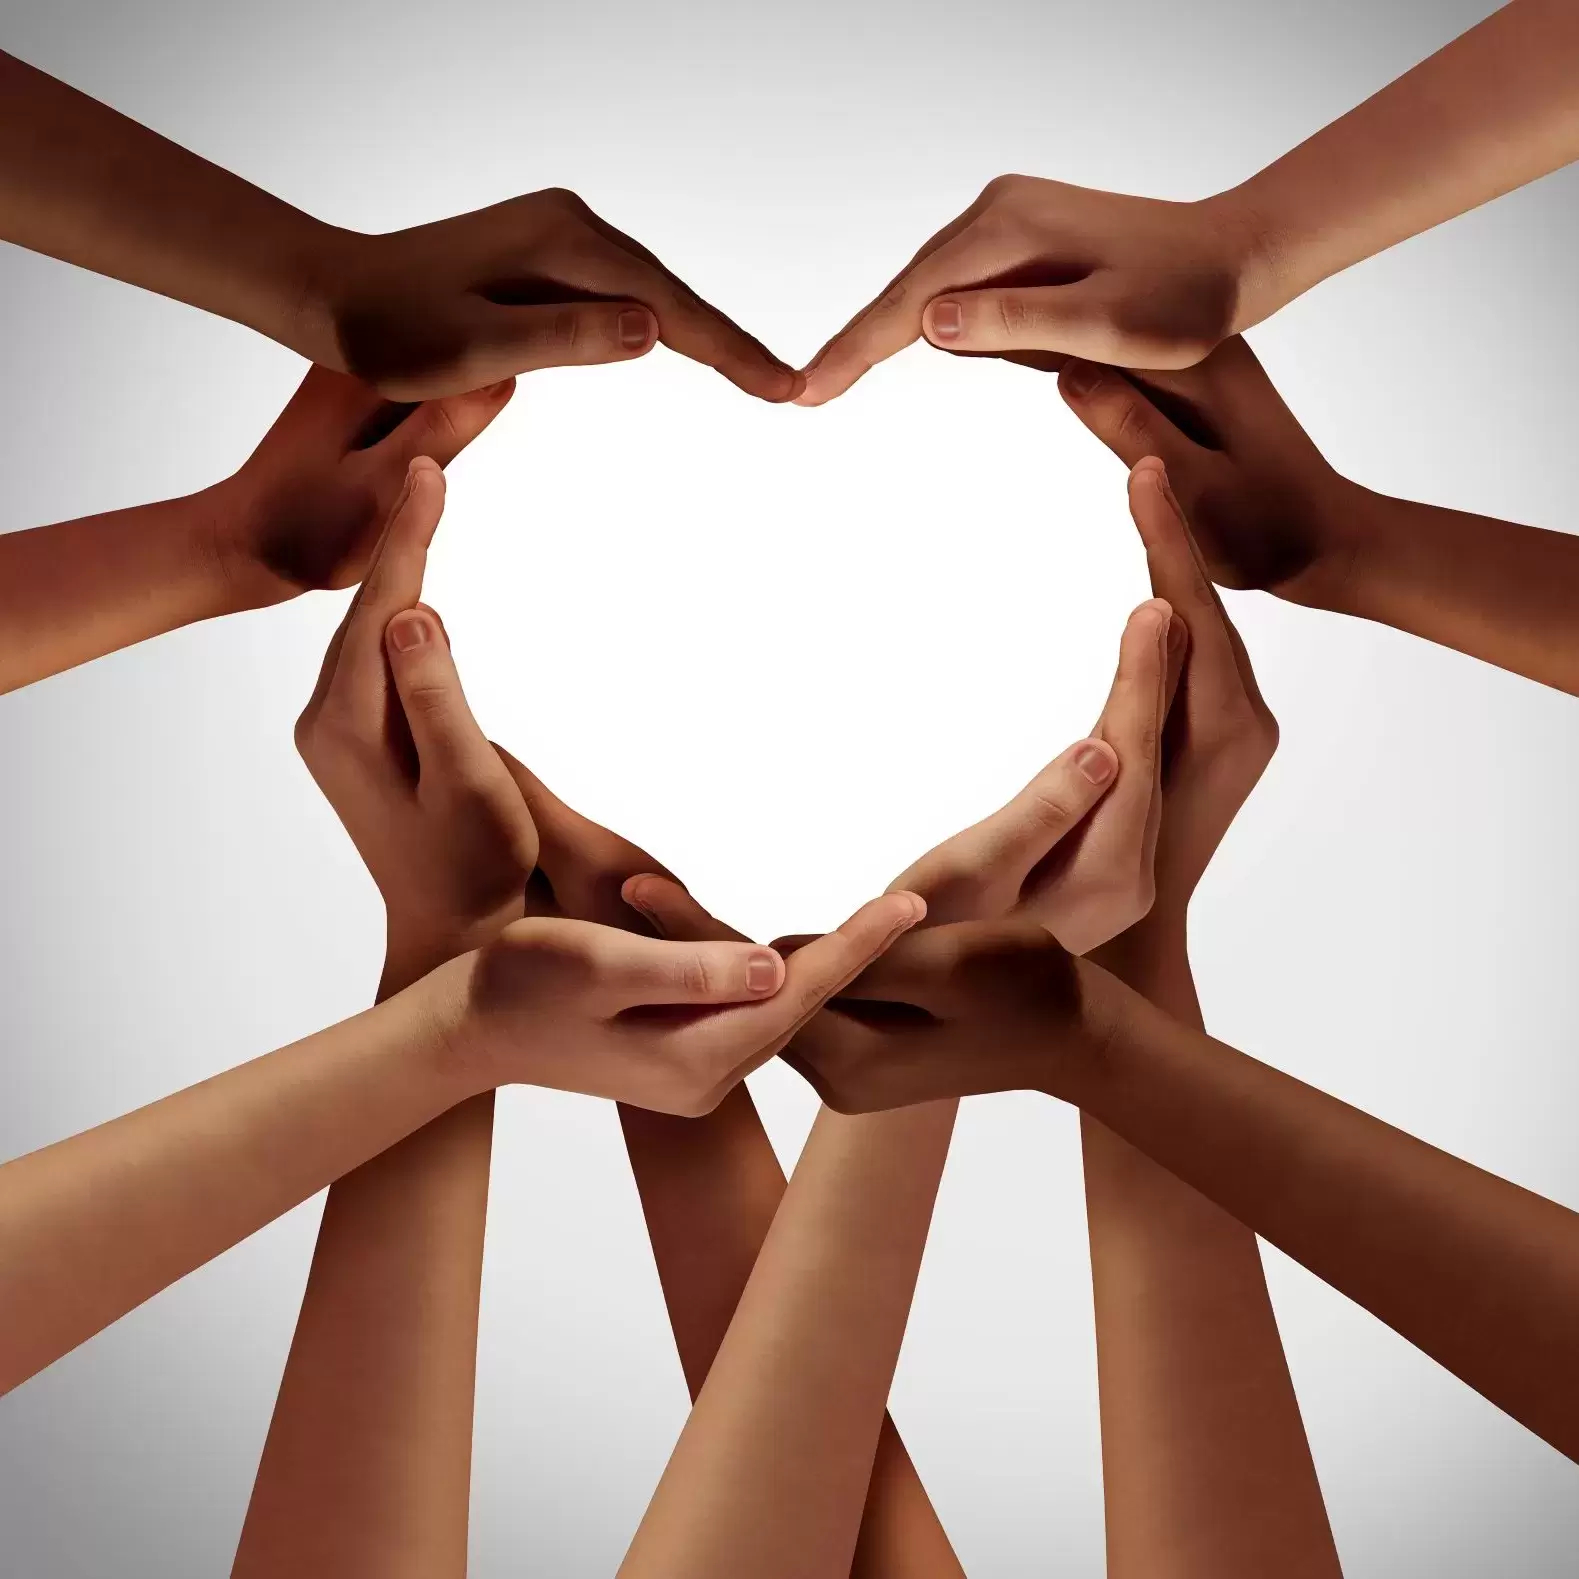 Hands from many different races forming a heart.